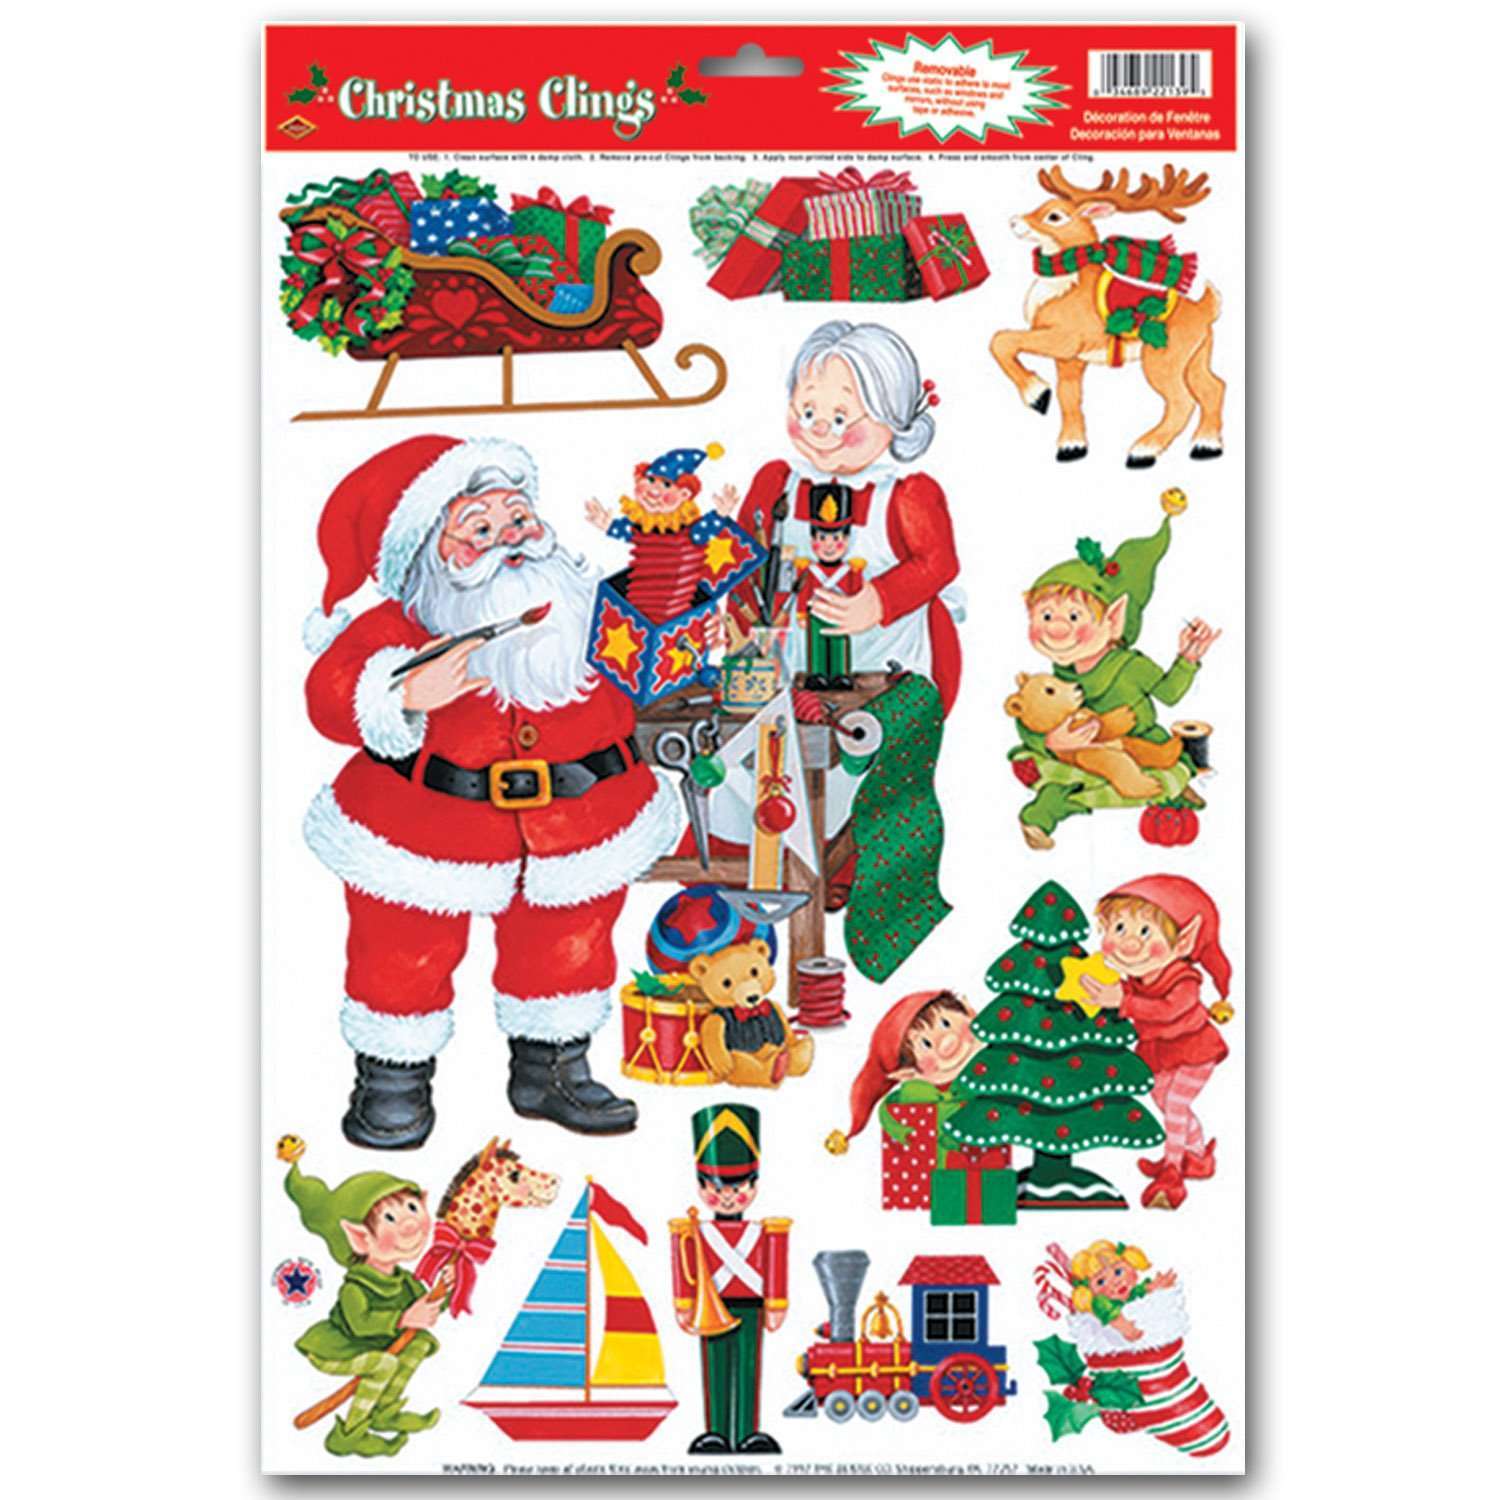 Christmas Clings Holiday Decorations